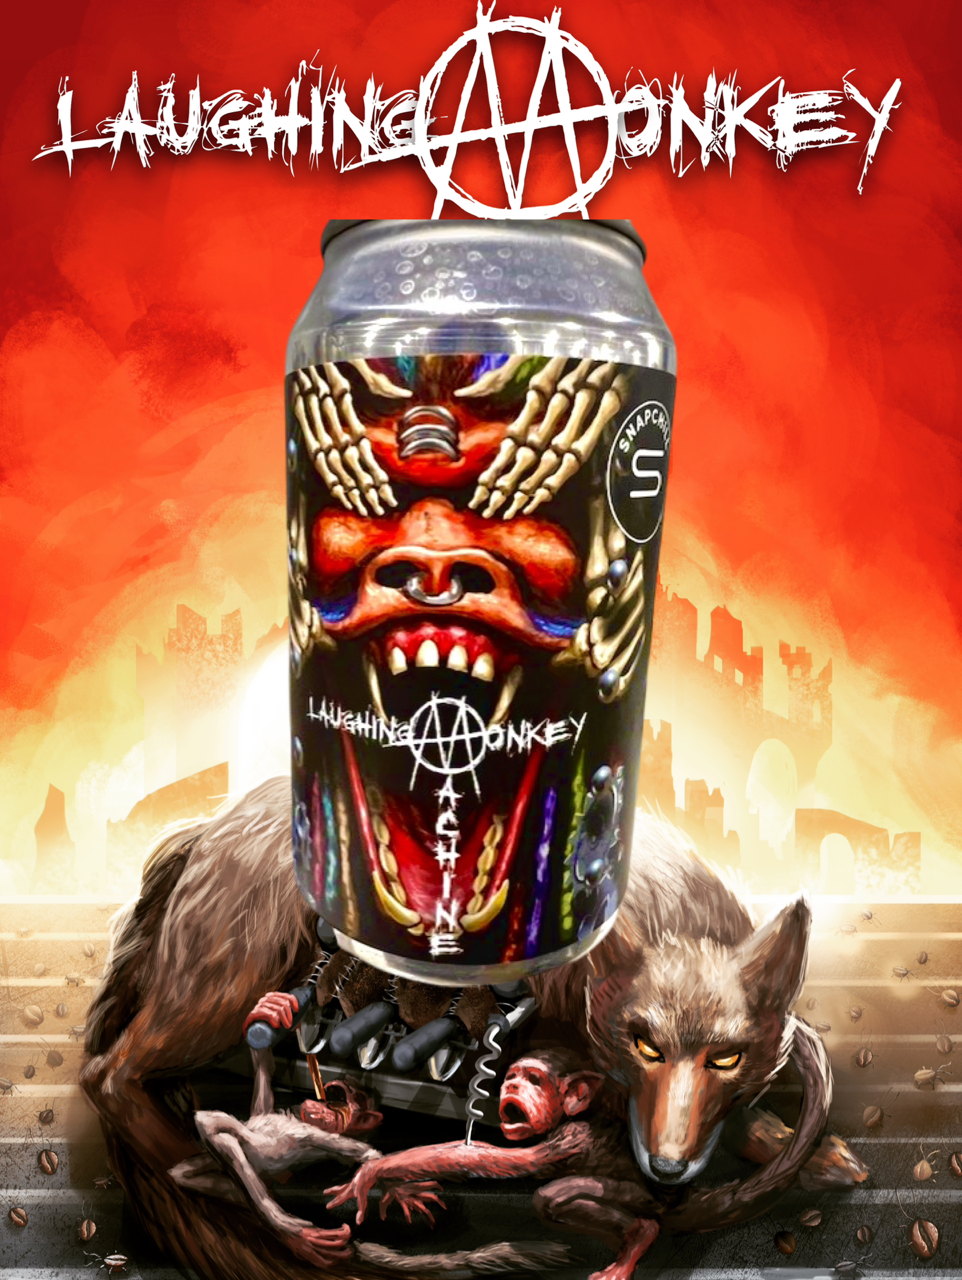 Ministry’s Official ‘Laughing Monkey Machine’ Coffee  1st Cold Can Edition Promo Box